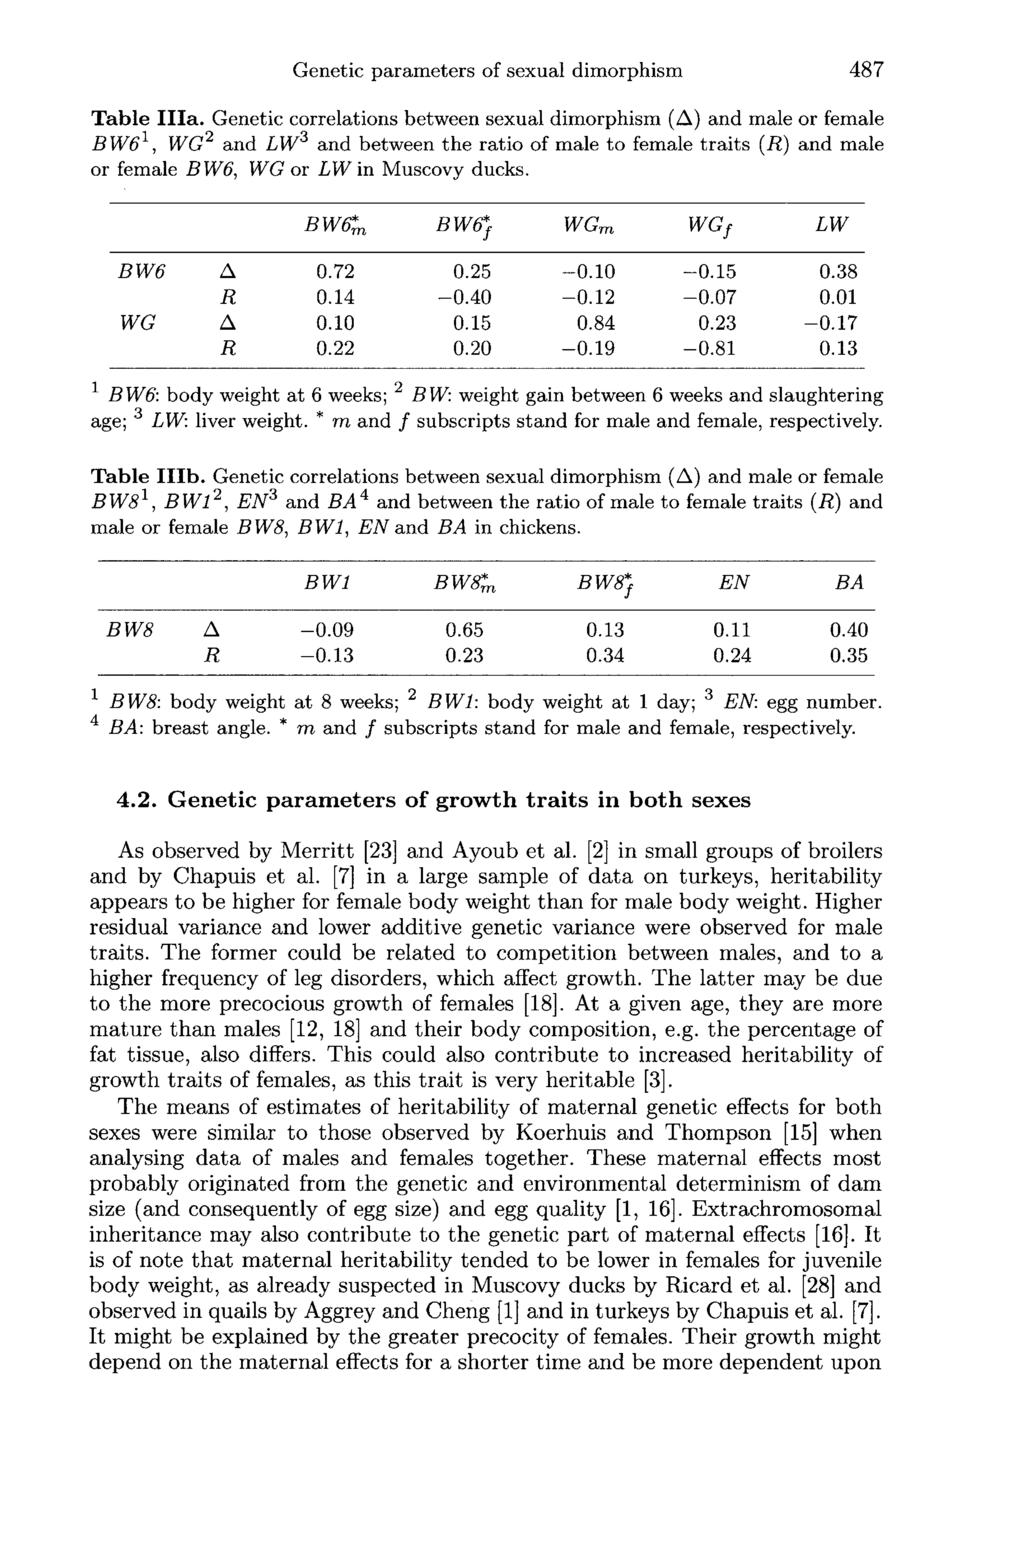 4.2. Genetic parameters of growth traits in both sexes As observed by Merritt [23] and Ayoub et al. [2] in small groups of broilers and by Chapuis et al.